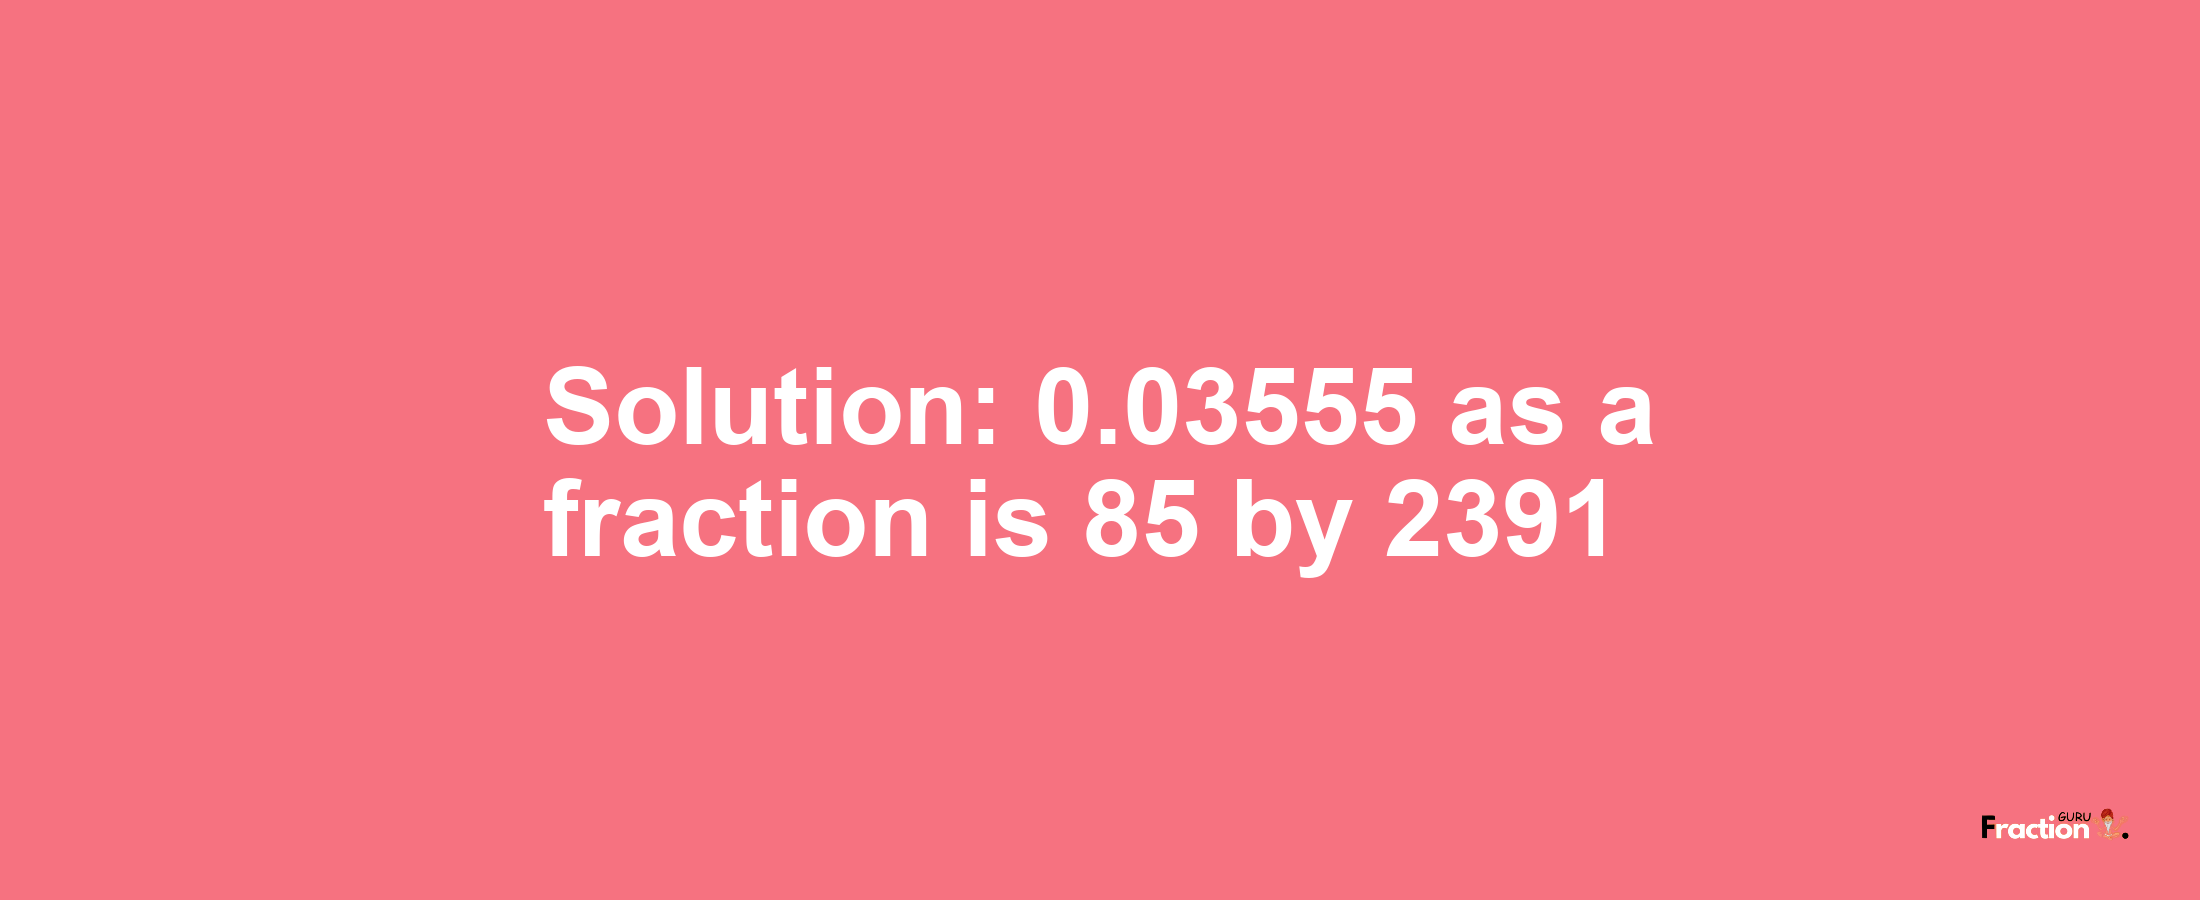 Solution:0.03555 as a fraction is 85/2391